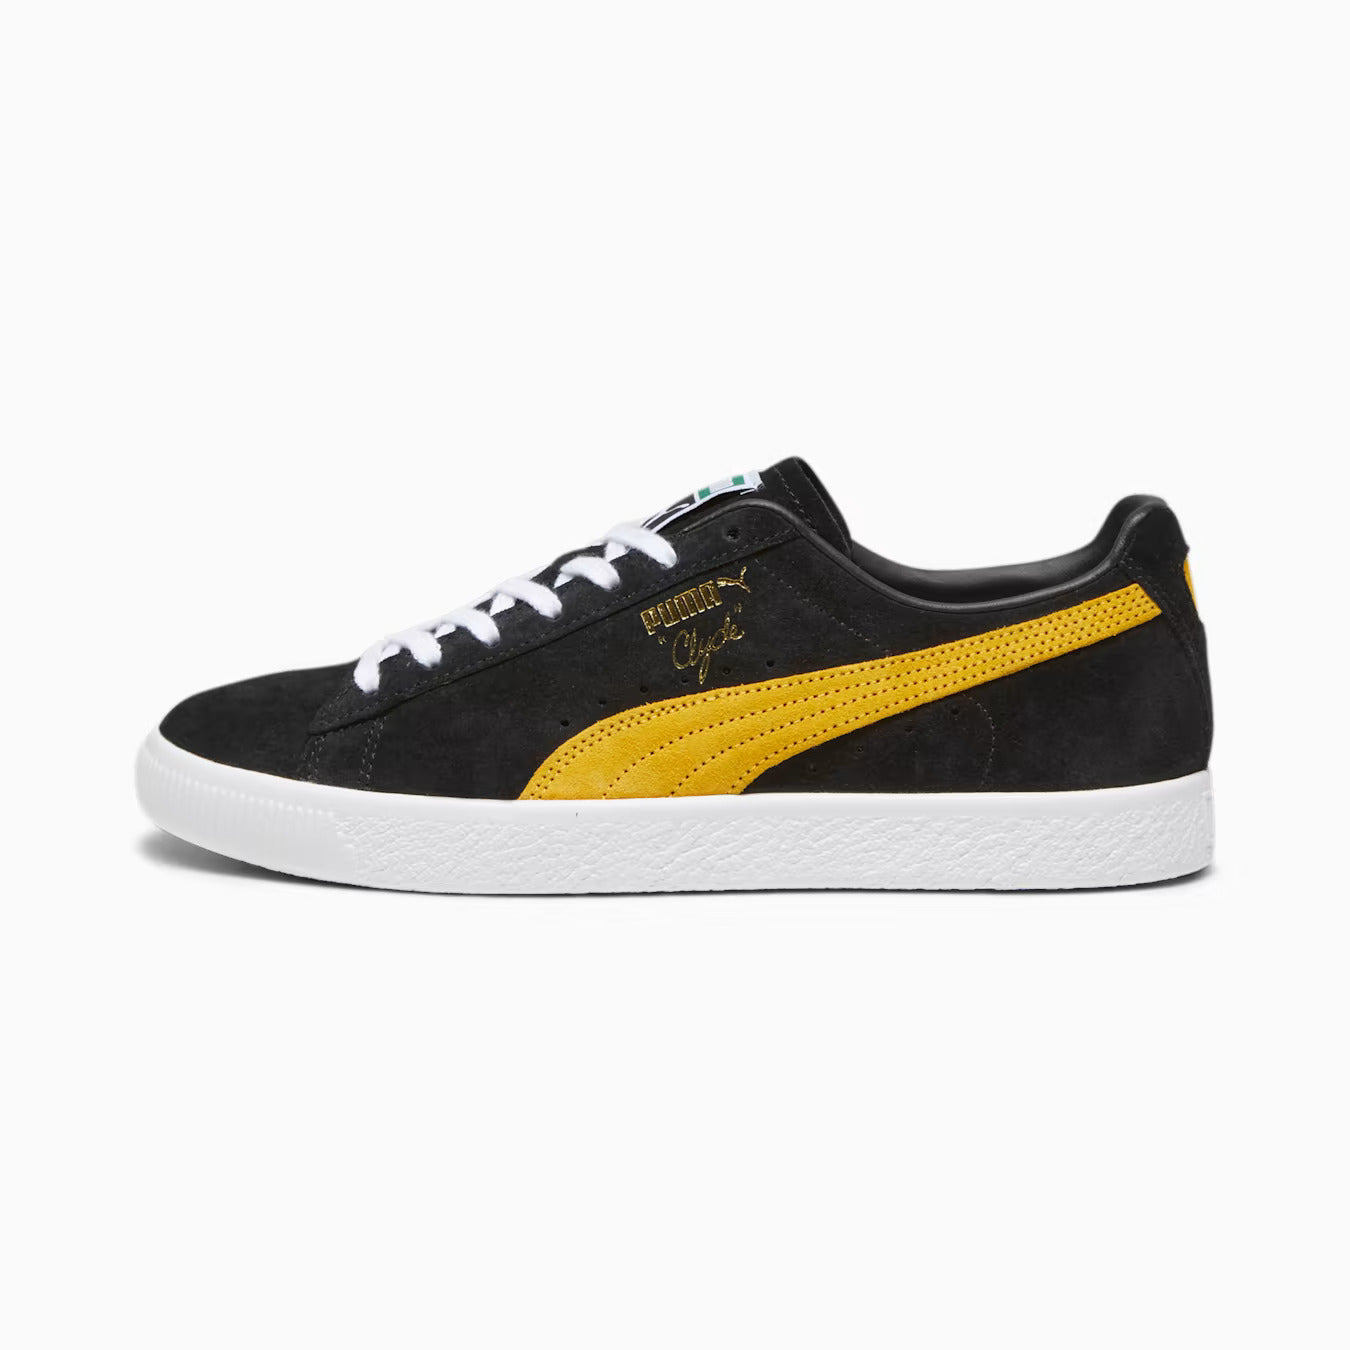 Puma Clyde OG Black/Yellow Sizzle